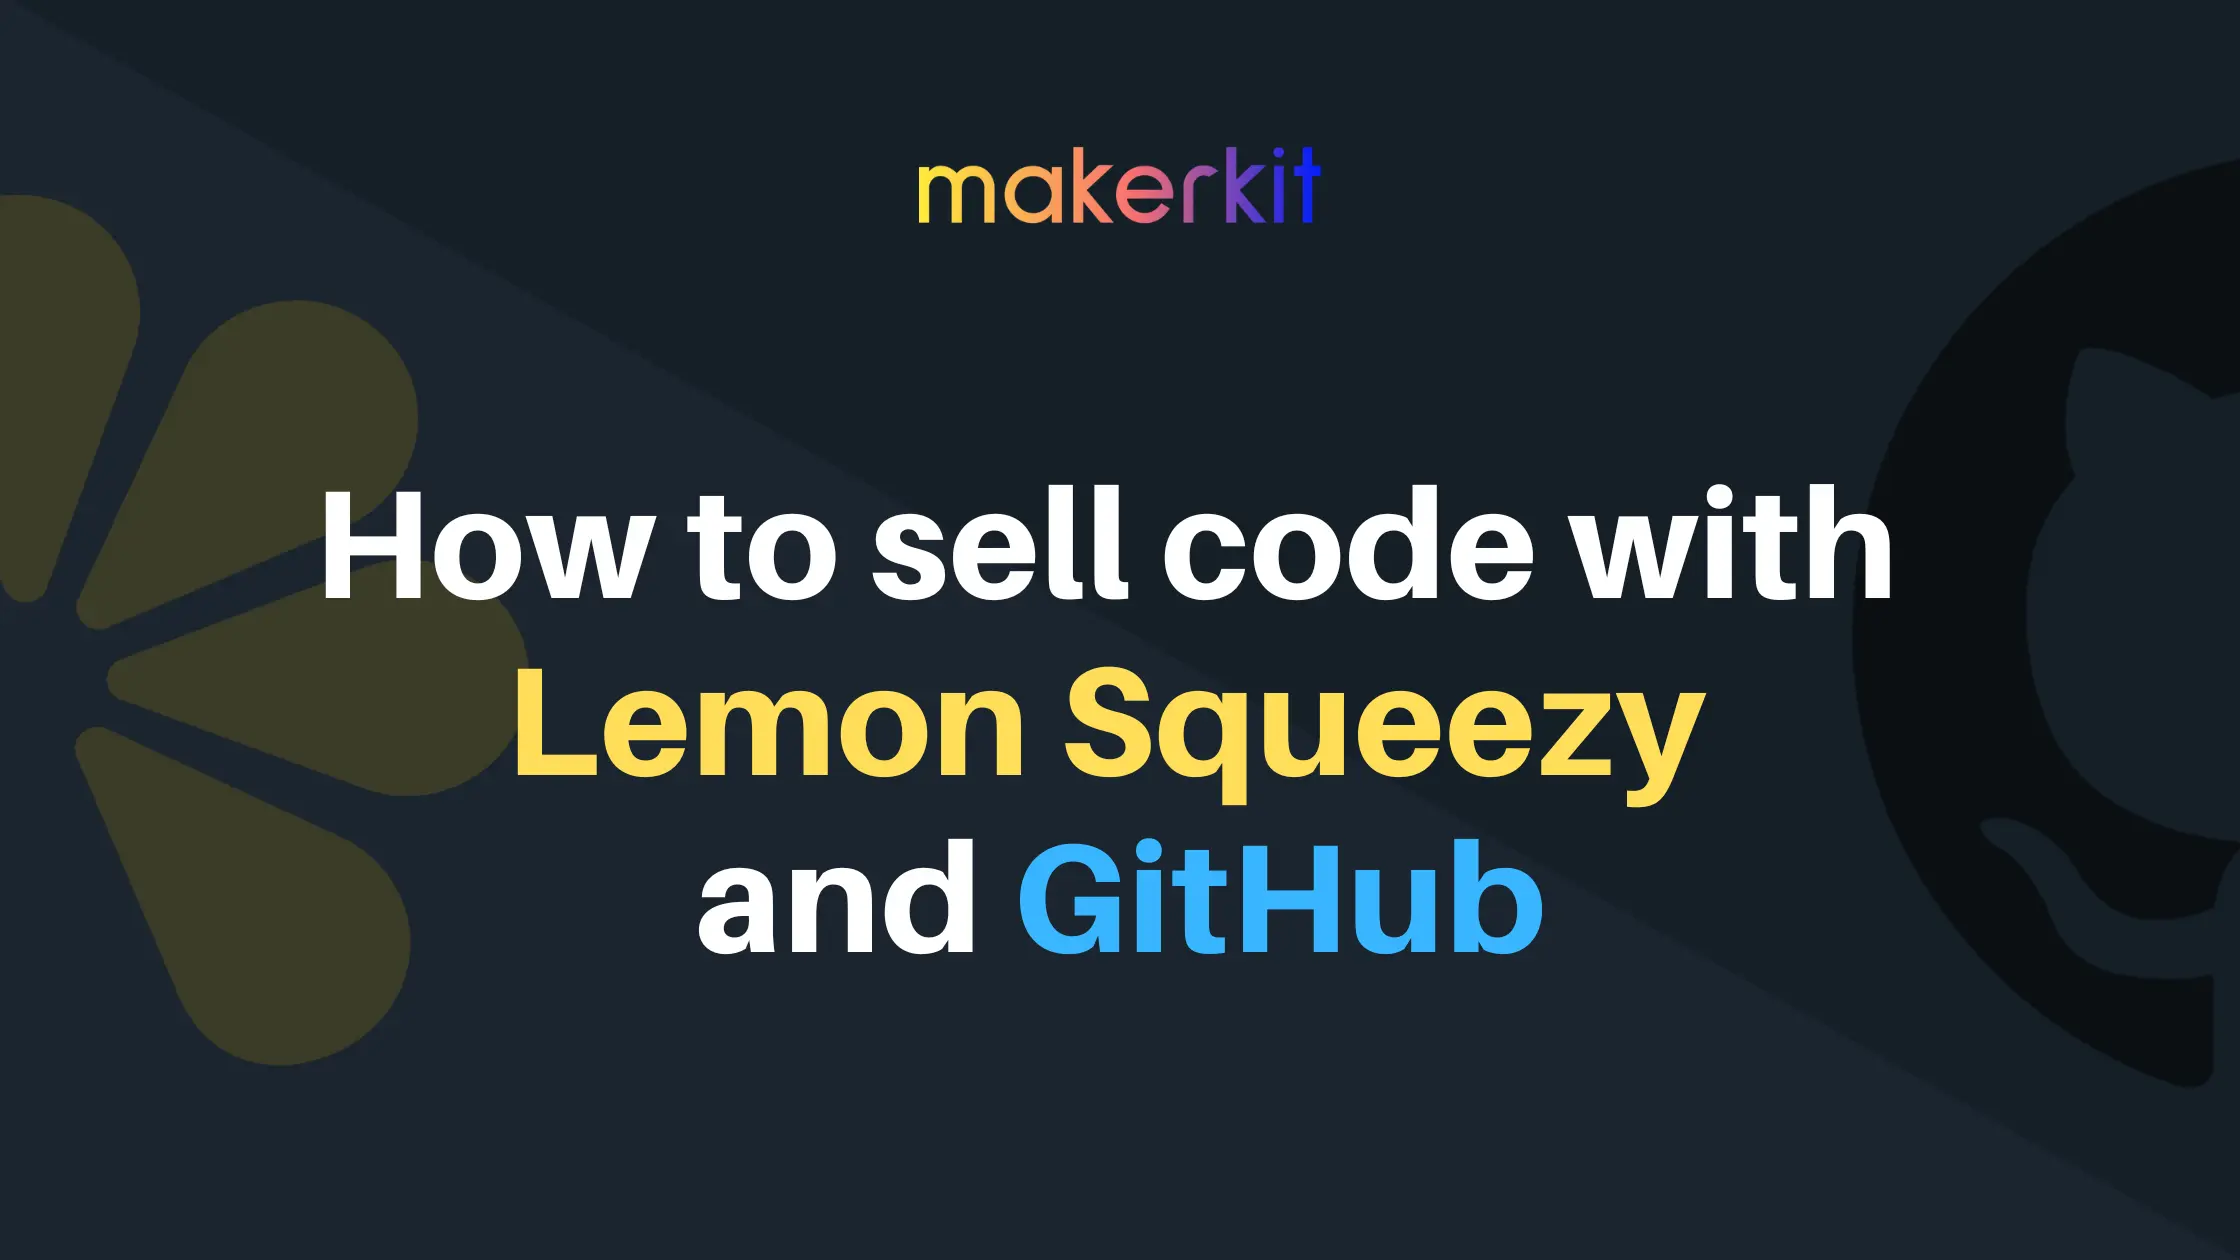 Cover Image for How to sell code with Lemon Squeezy and Github